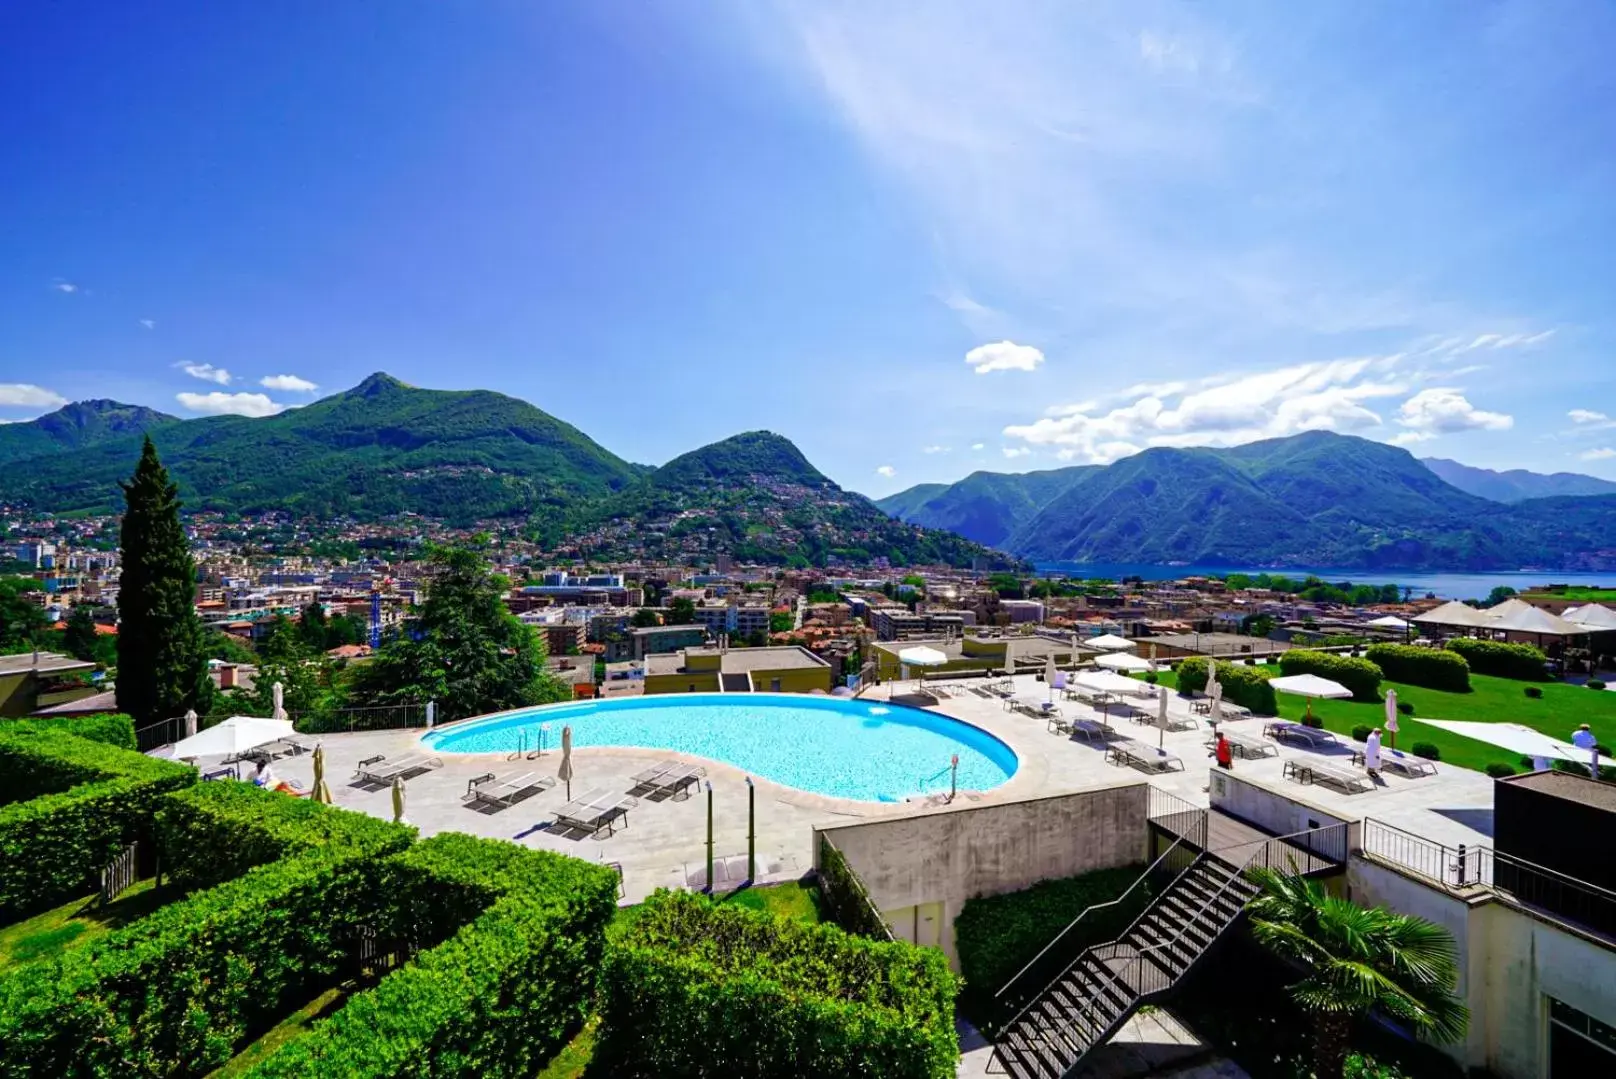 Swimming pool, Pool View in Villa Sassa Hotel, Residence & Spa - Ticino Hotels Group